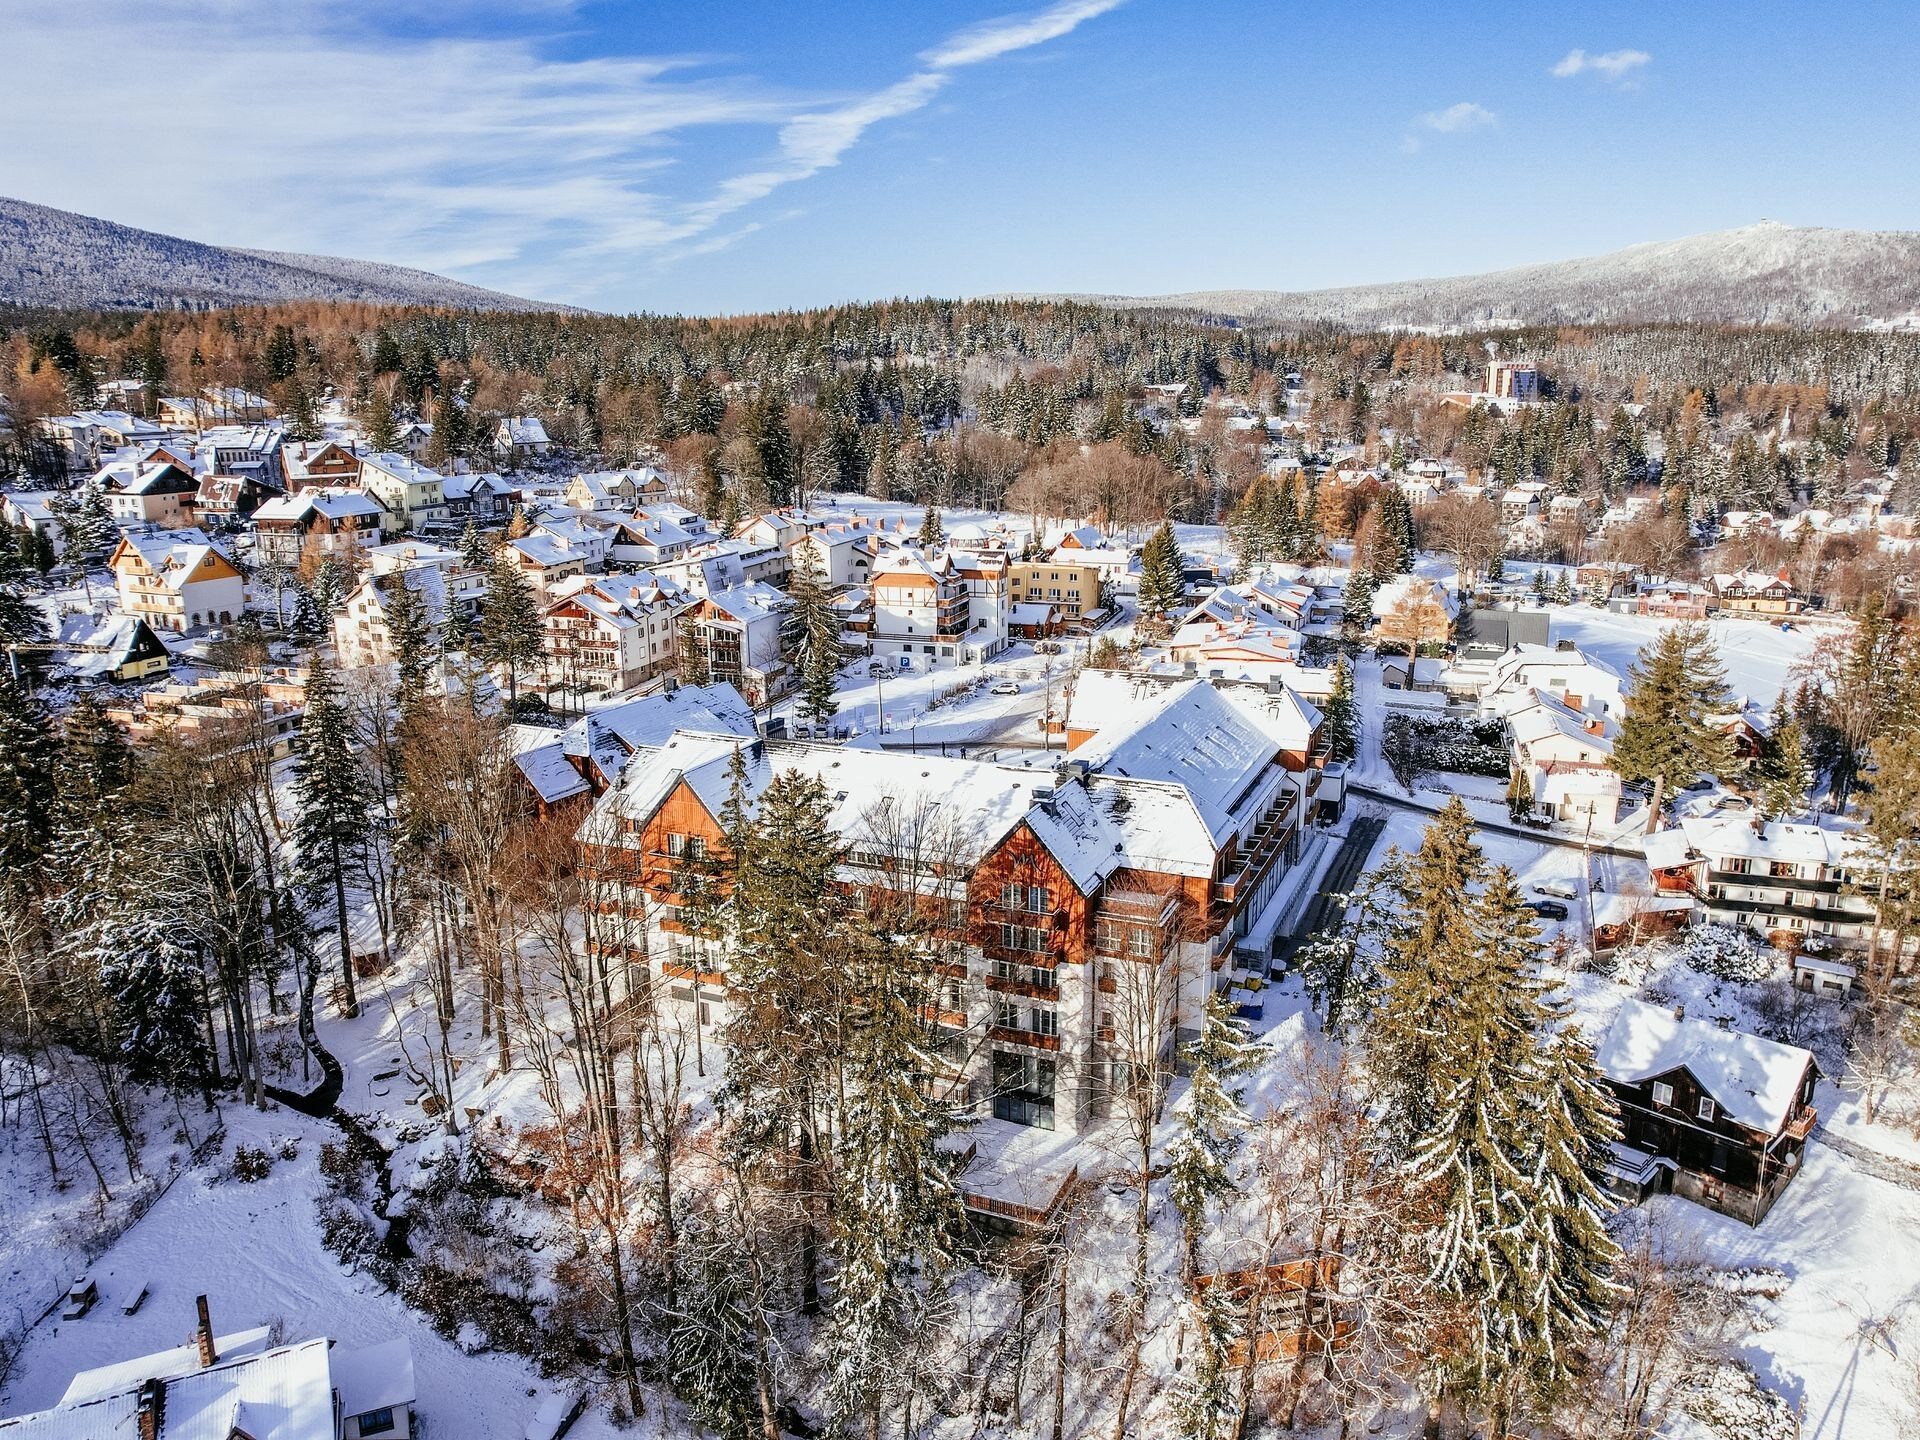 Christmas and New Year's Eve in the mountains - check out a hotel with a view of the Karkonosze Mountains